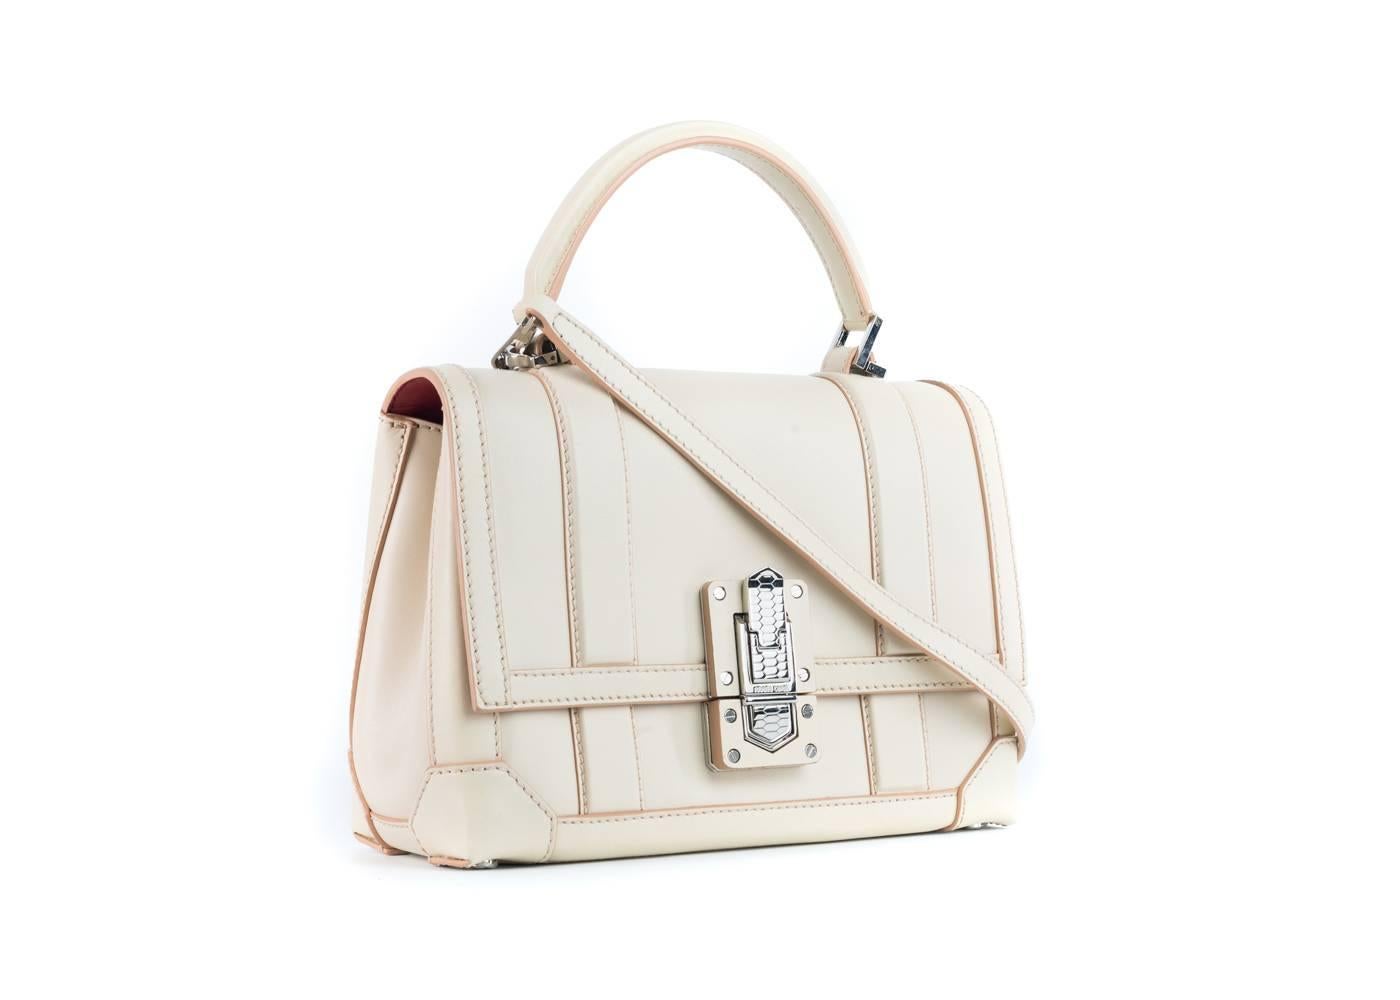 Creme 100% Leather Roberto Cavalli shoulder bag with Silver-tone hardware, With shoulder straps, leather trim, dual exterior pockets with fold-in flap closures,, Silver Clasp to open bag. two tone creme look. Includes tags. Shop Roberto Cavalli